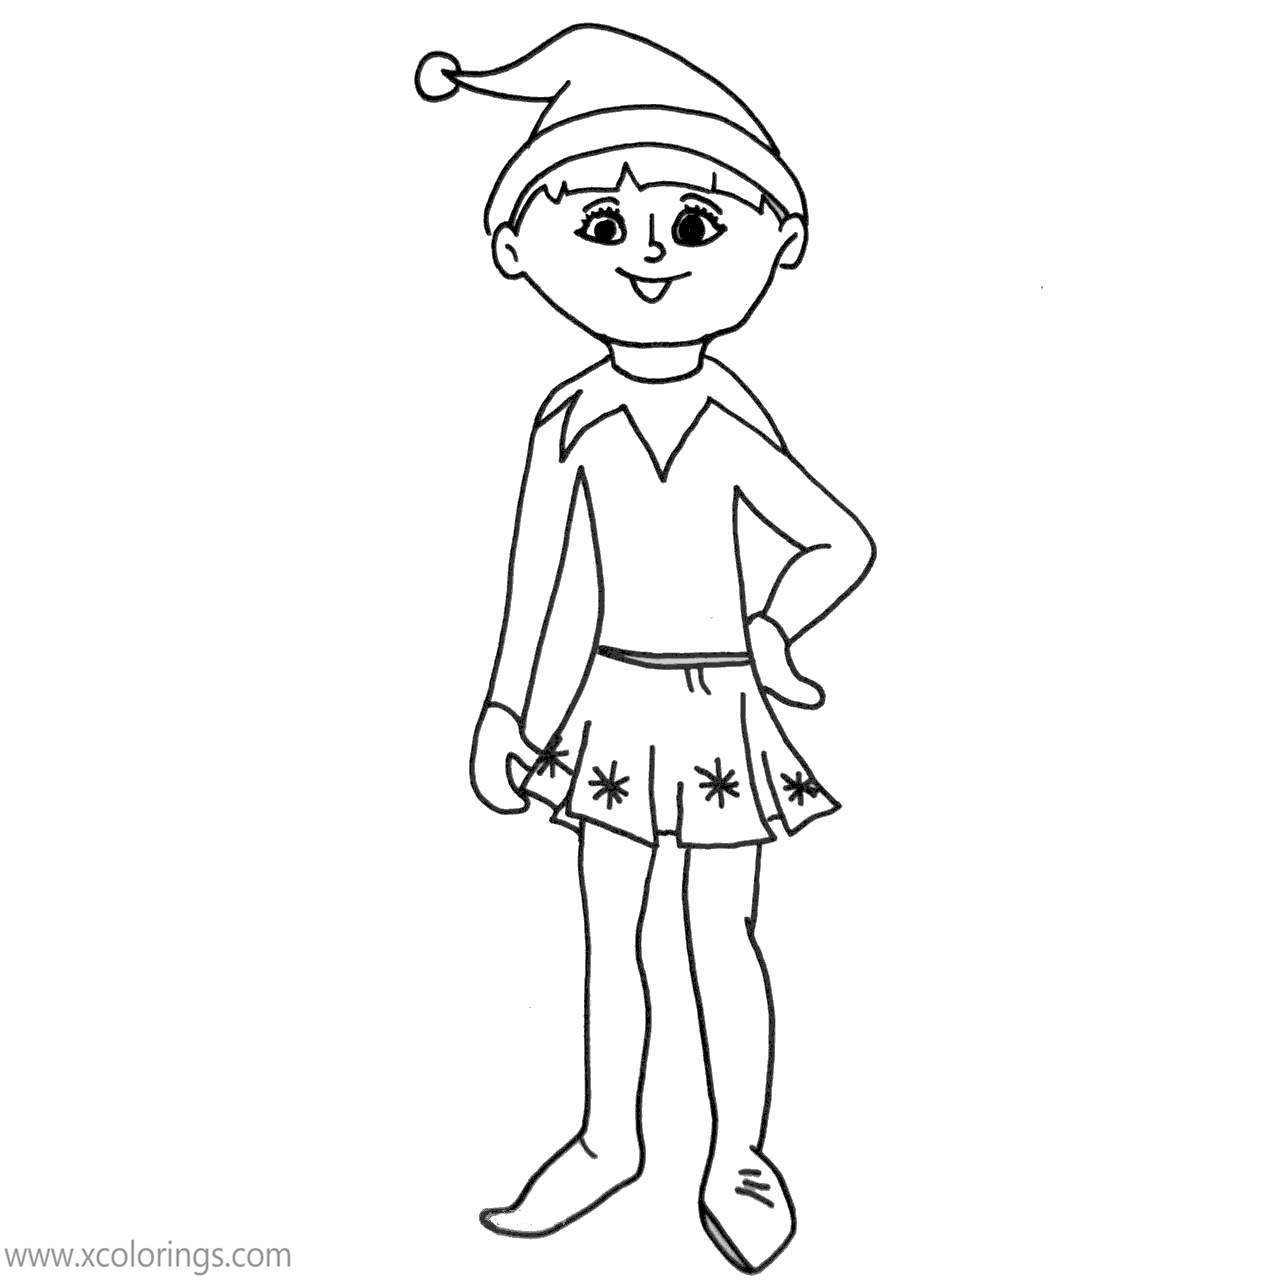 Free Snowflake from Elf On The Shelf Coloring Pages printable